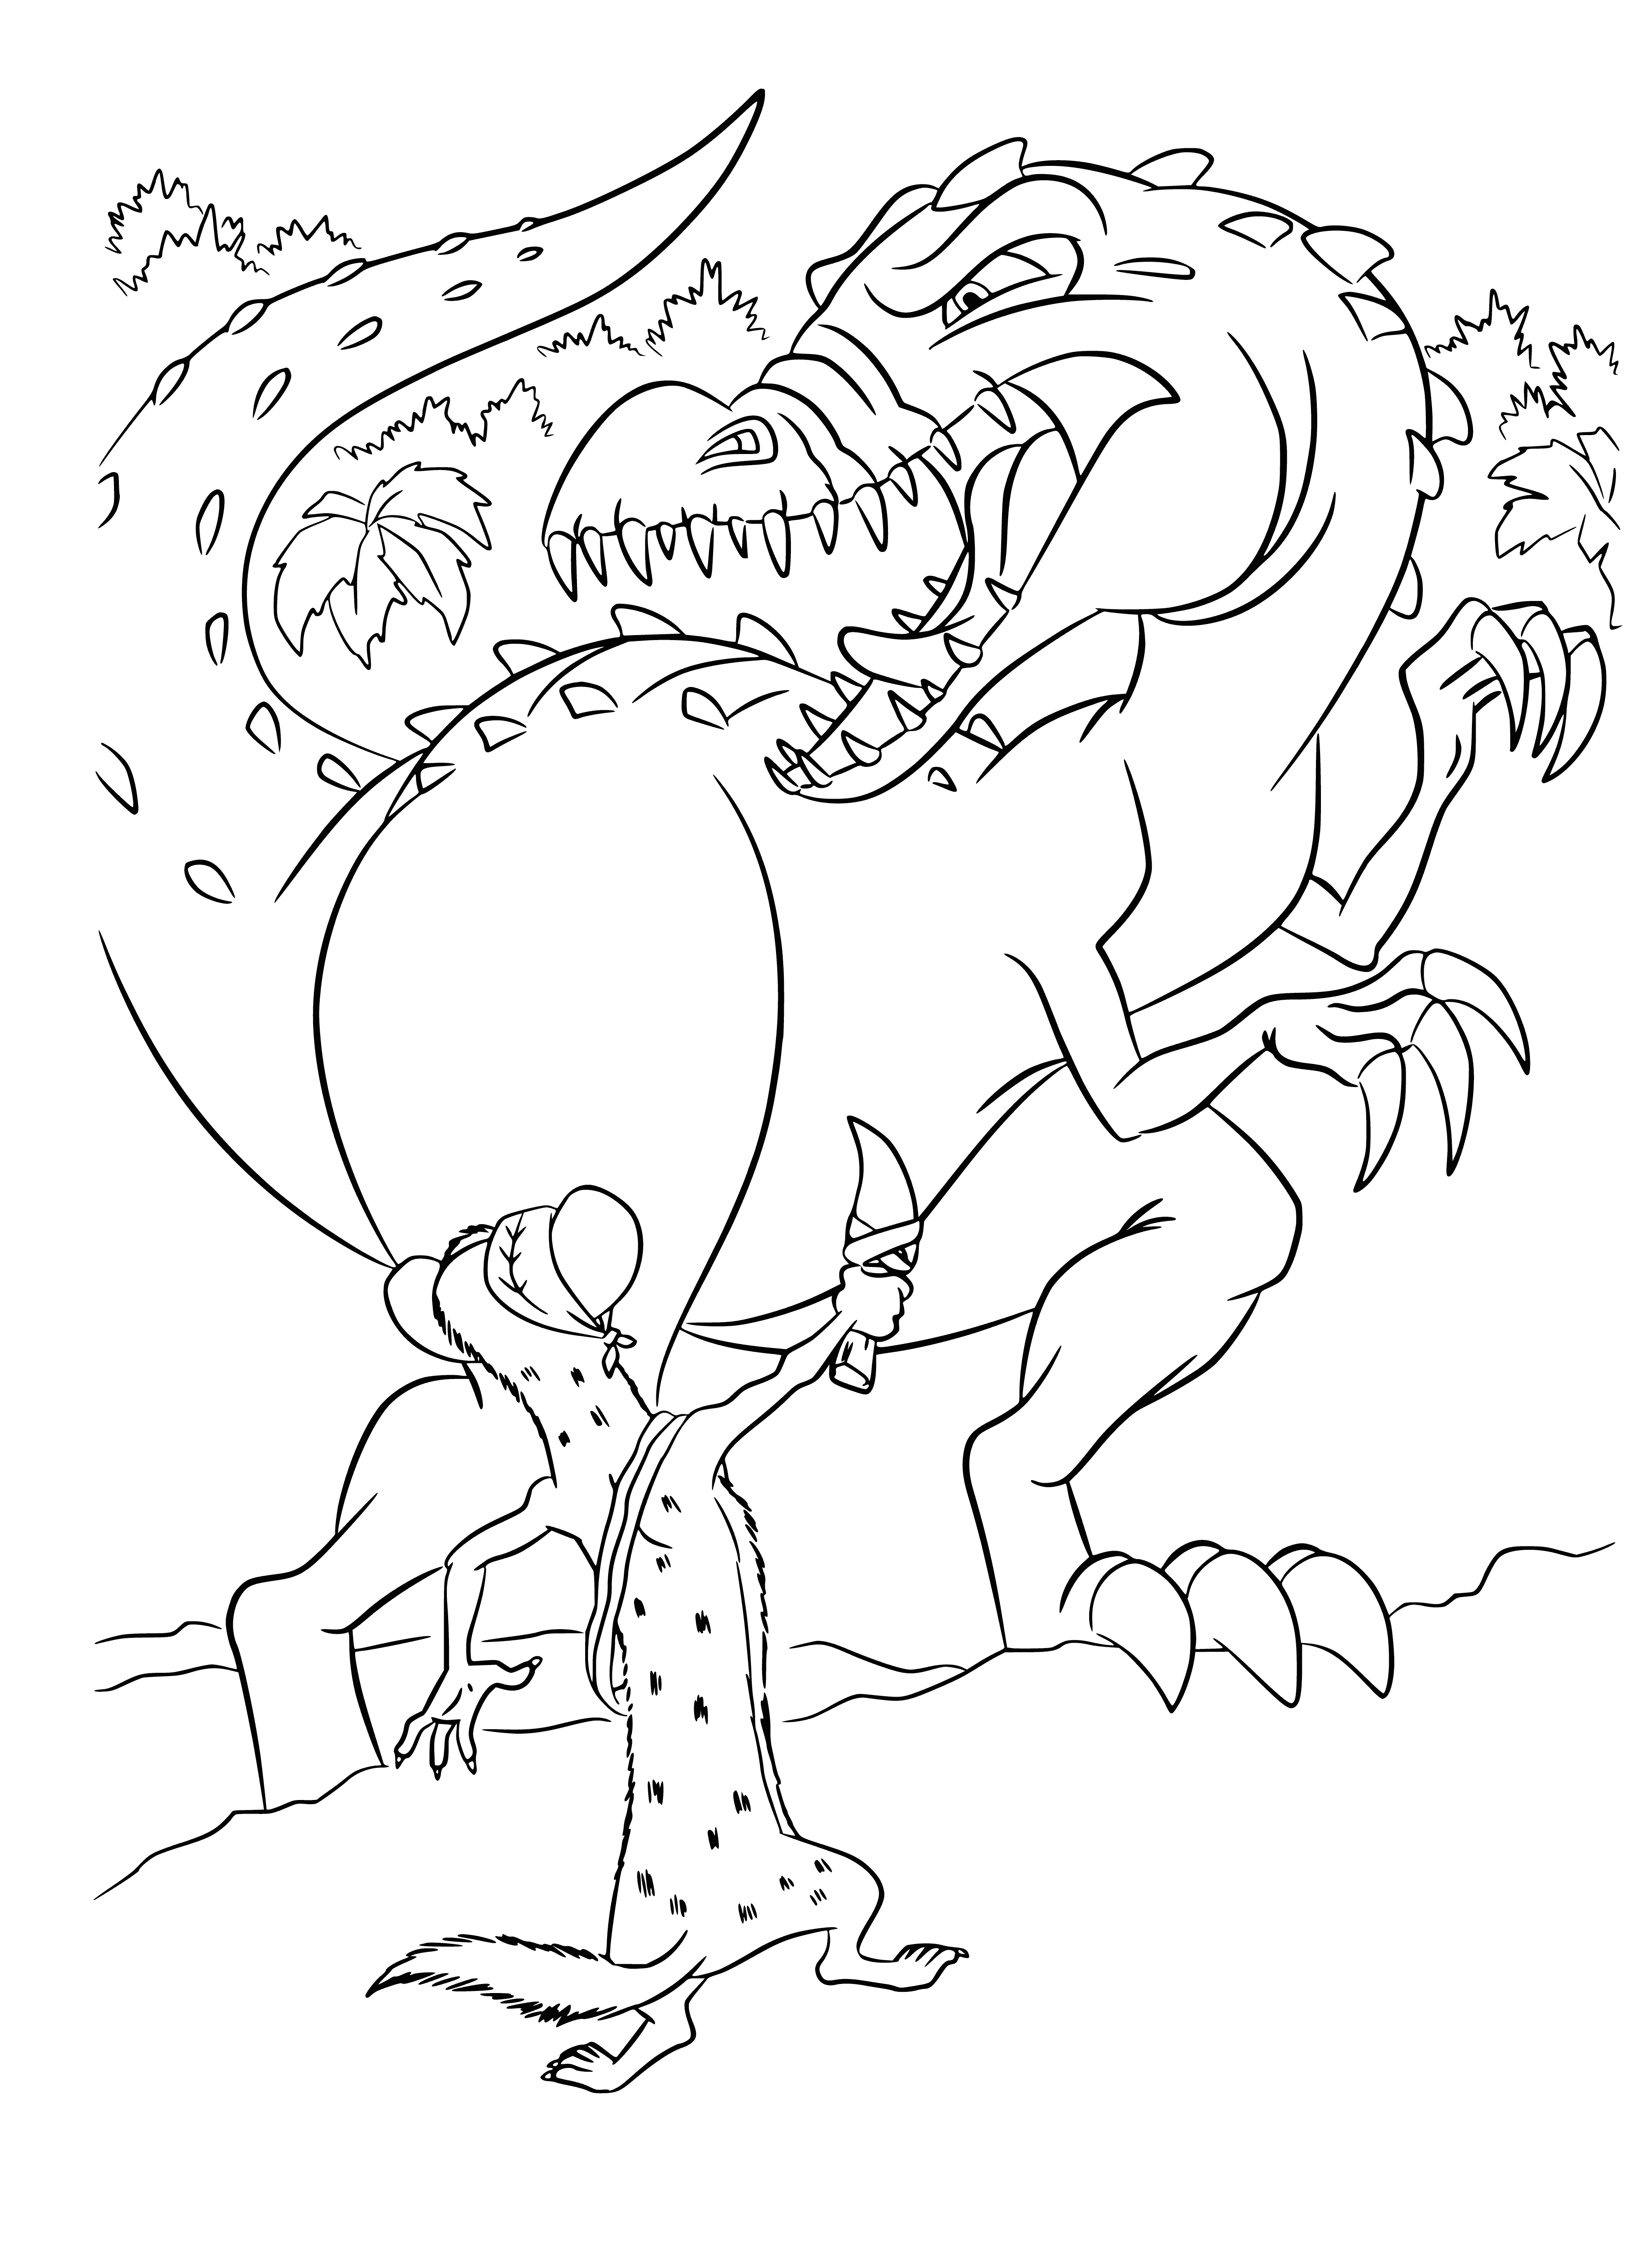 Rudy and Buck coloring page